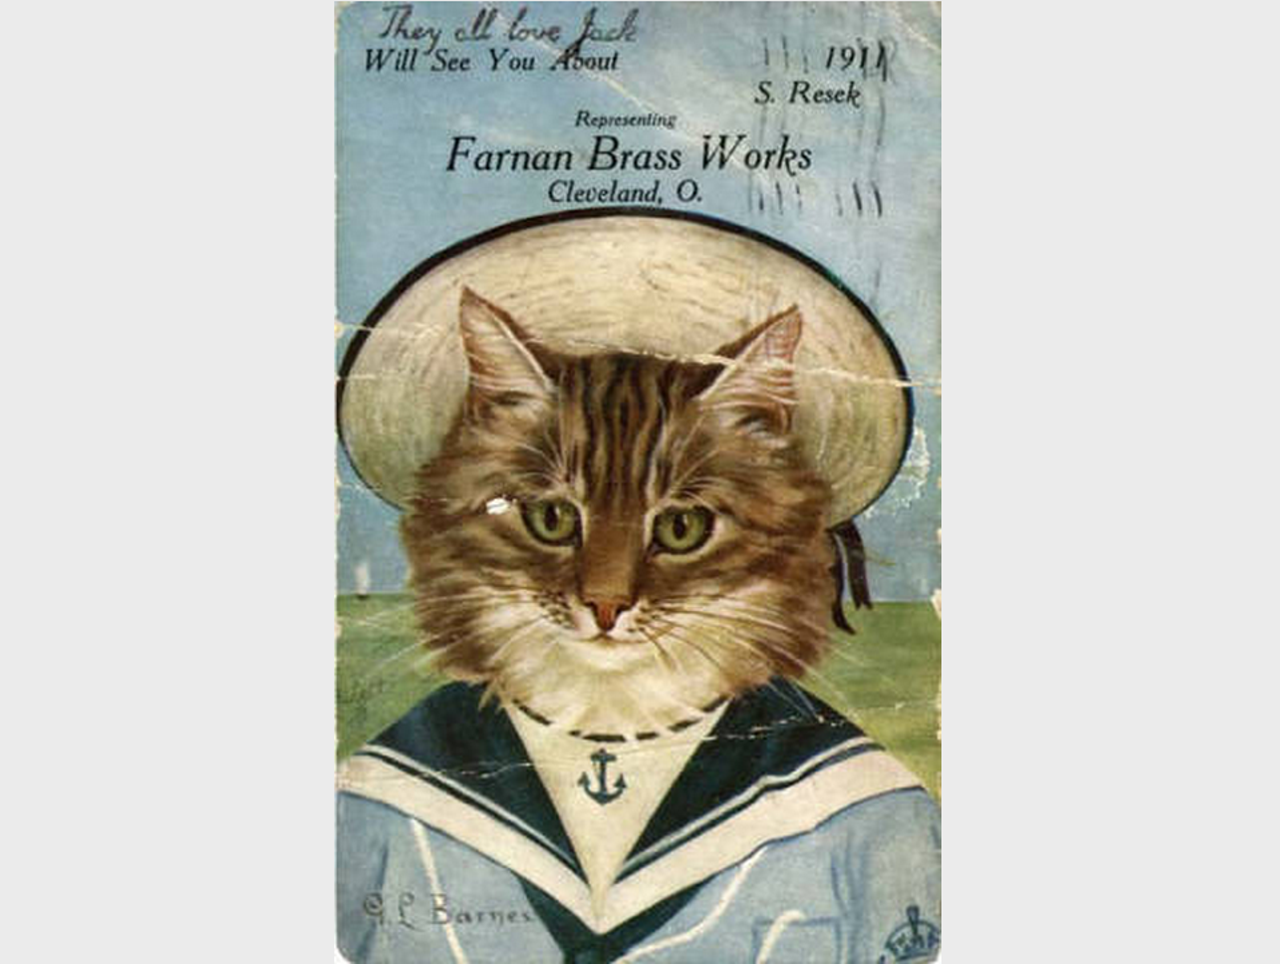 A cat in a sailor suit promoting Cleveland's Farnan Brass Works.